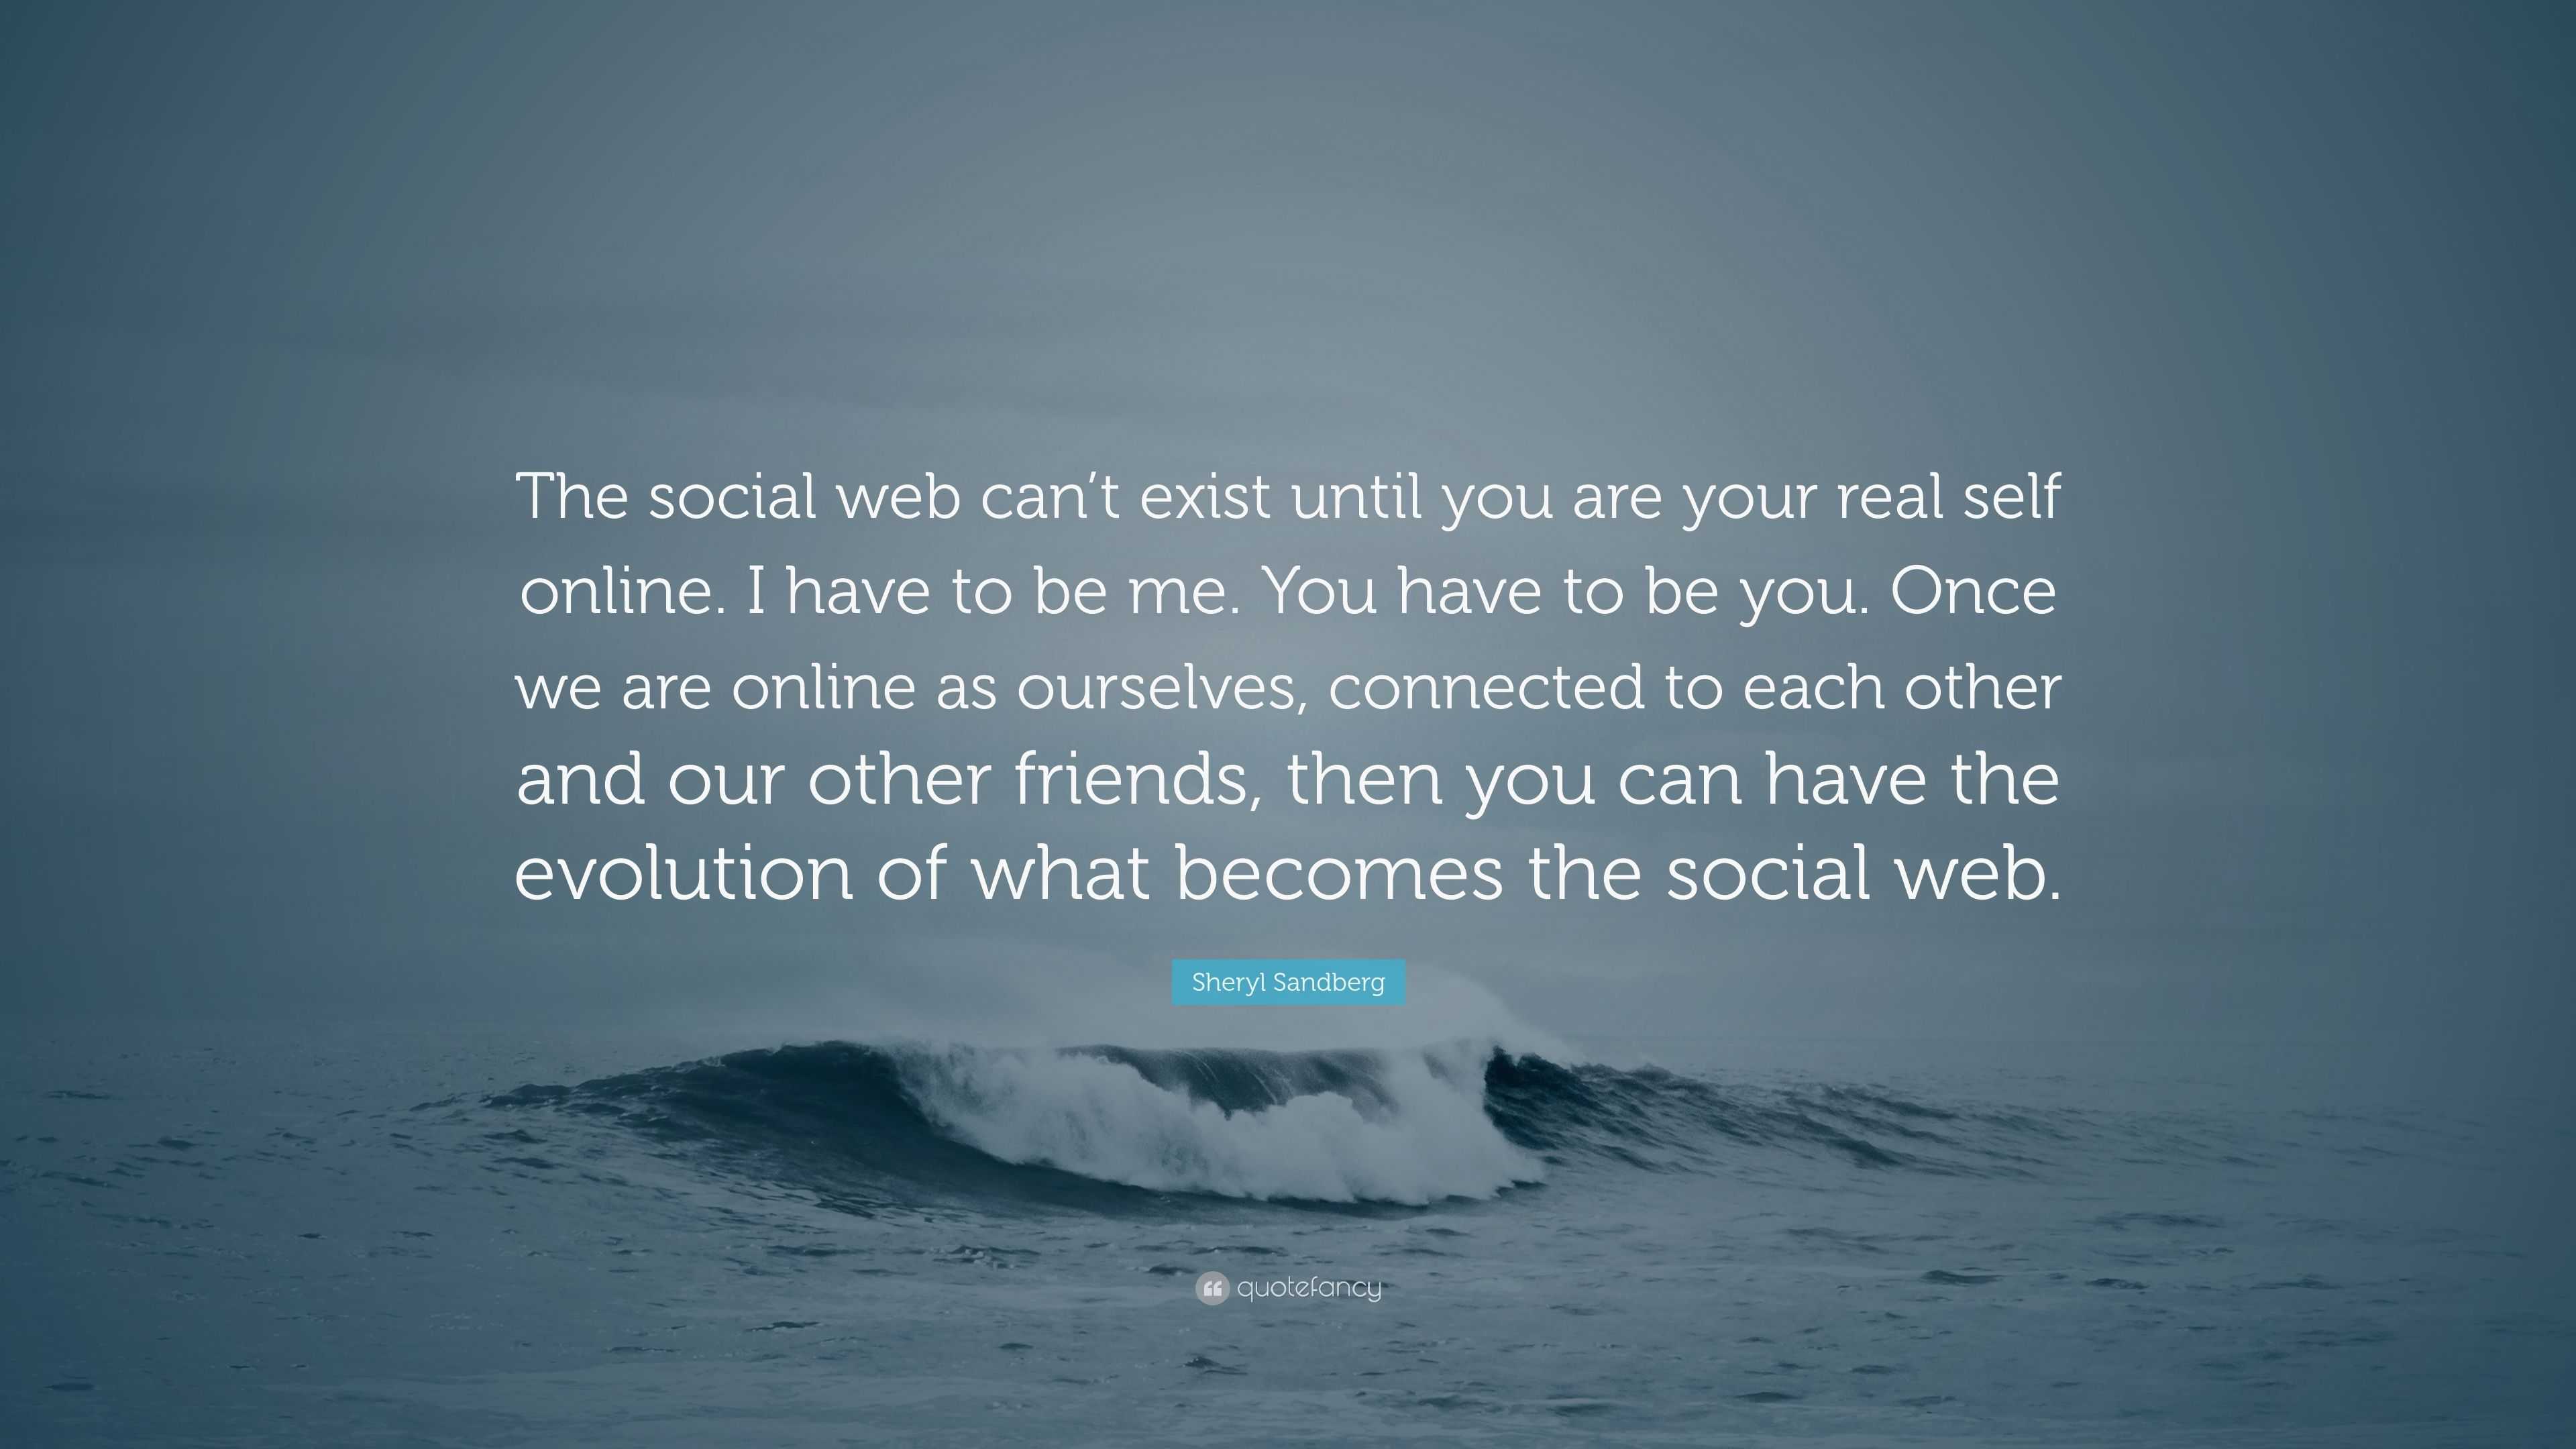 Sheryl Sandberg quote: The social web can't exist until you are your real